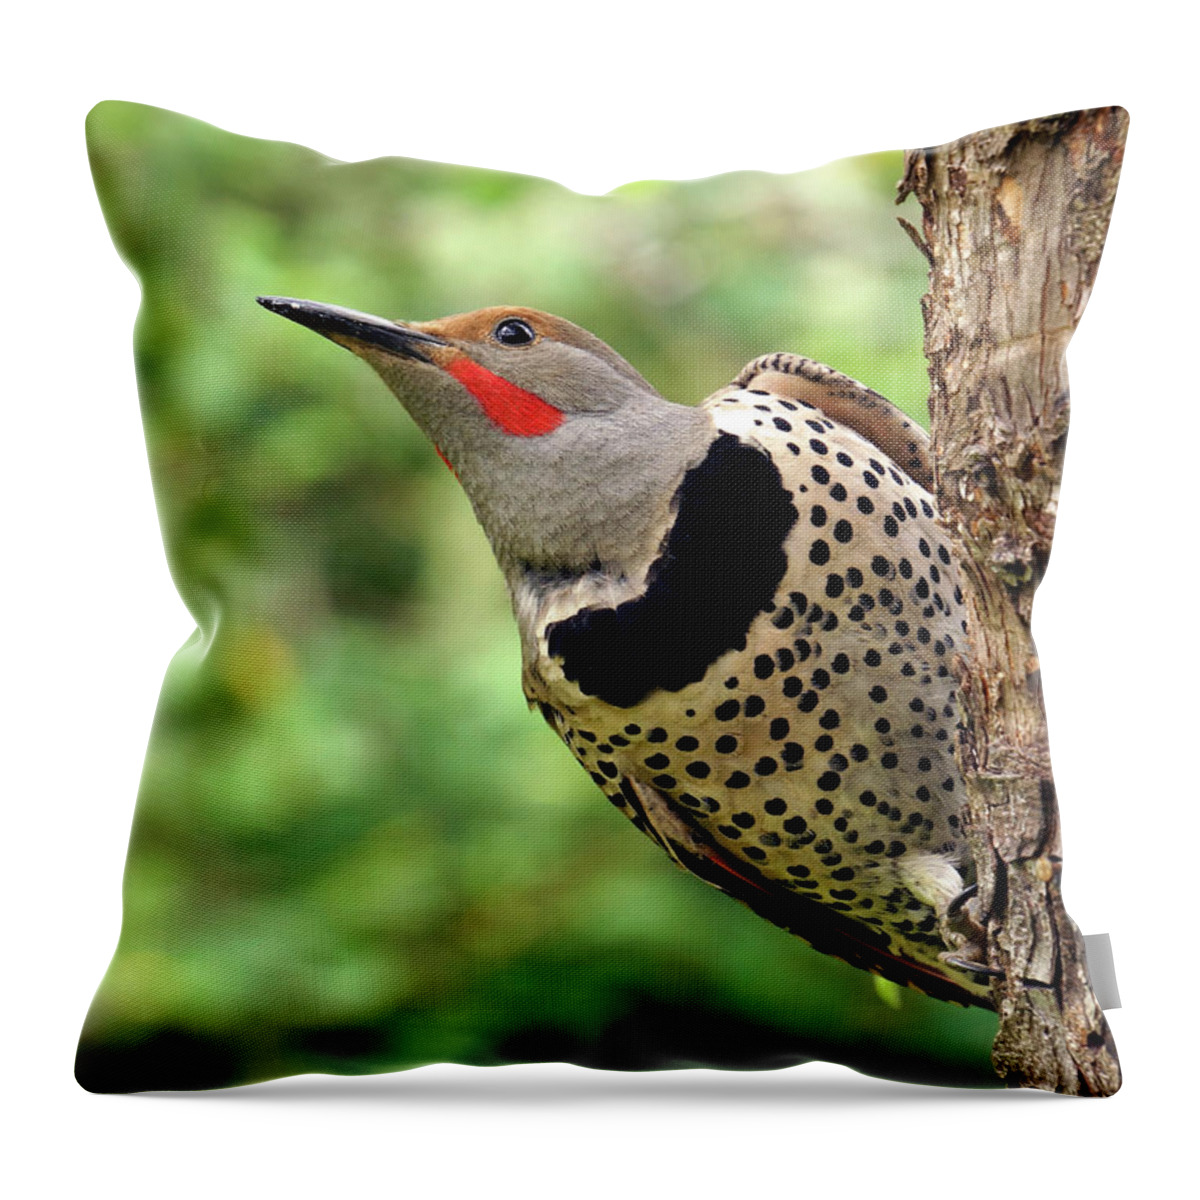 Northern Flicker Throw Pillow featuring the photograph Flicker by Inge Riis McDonald